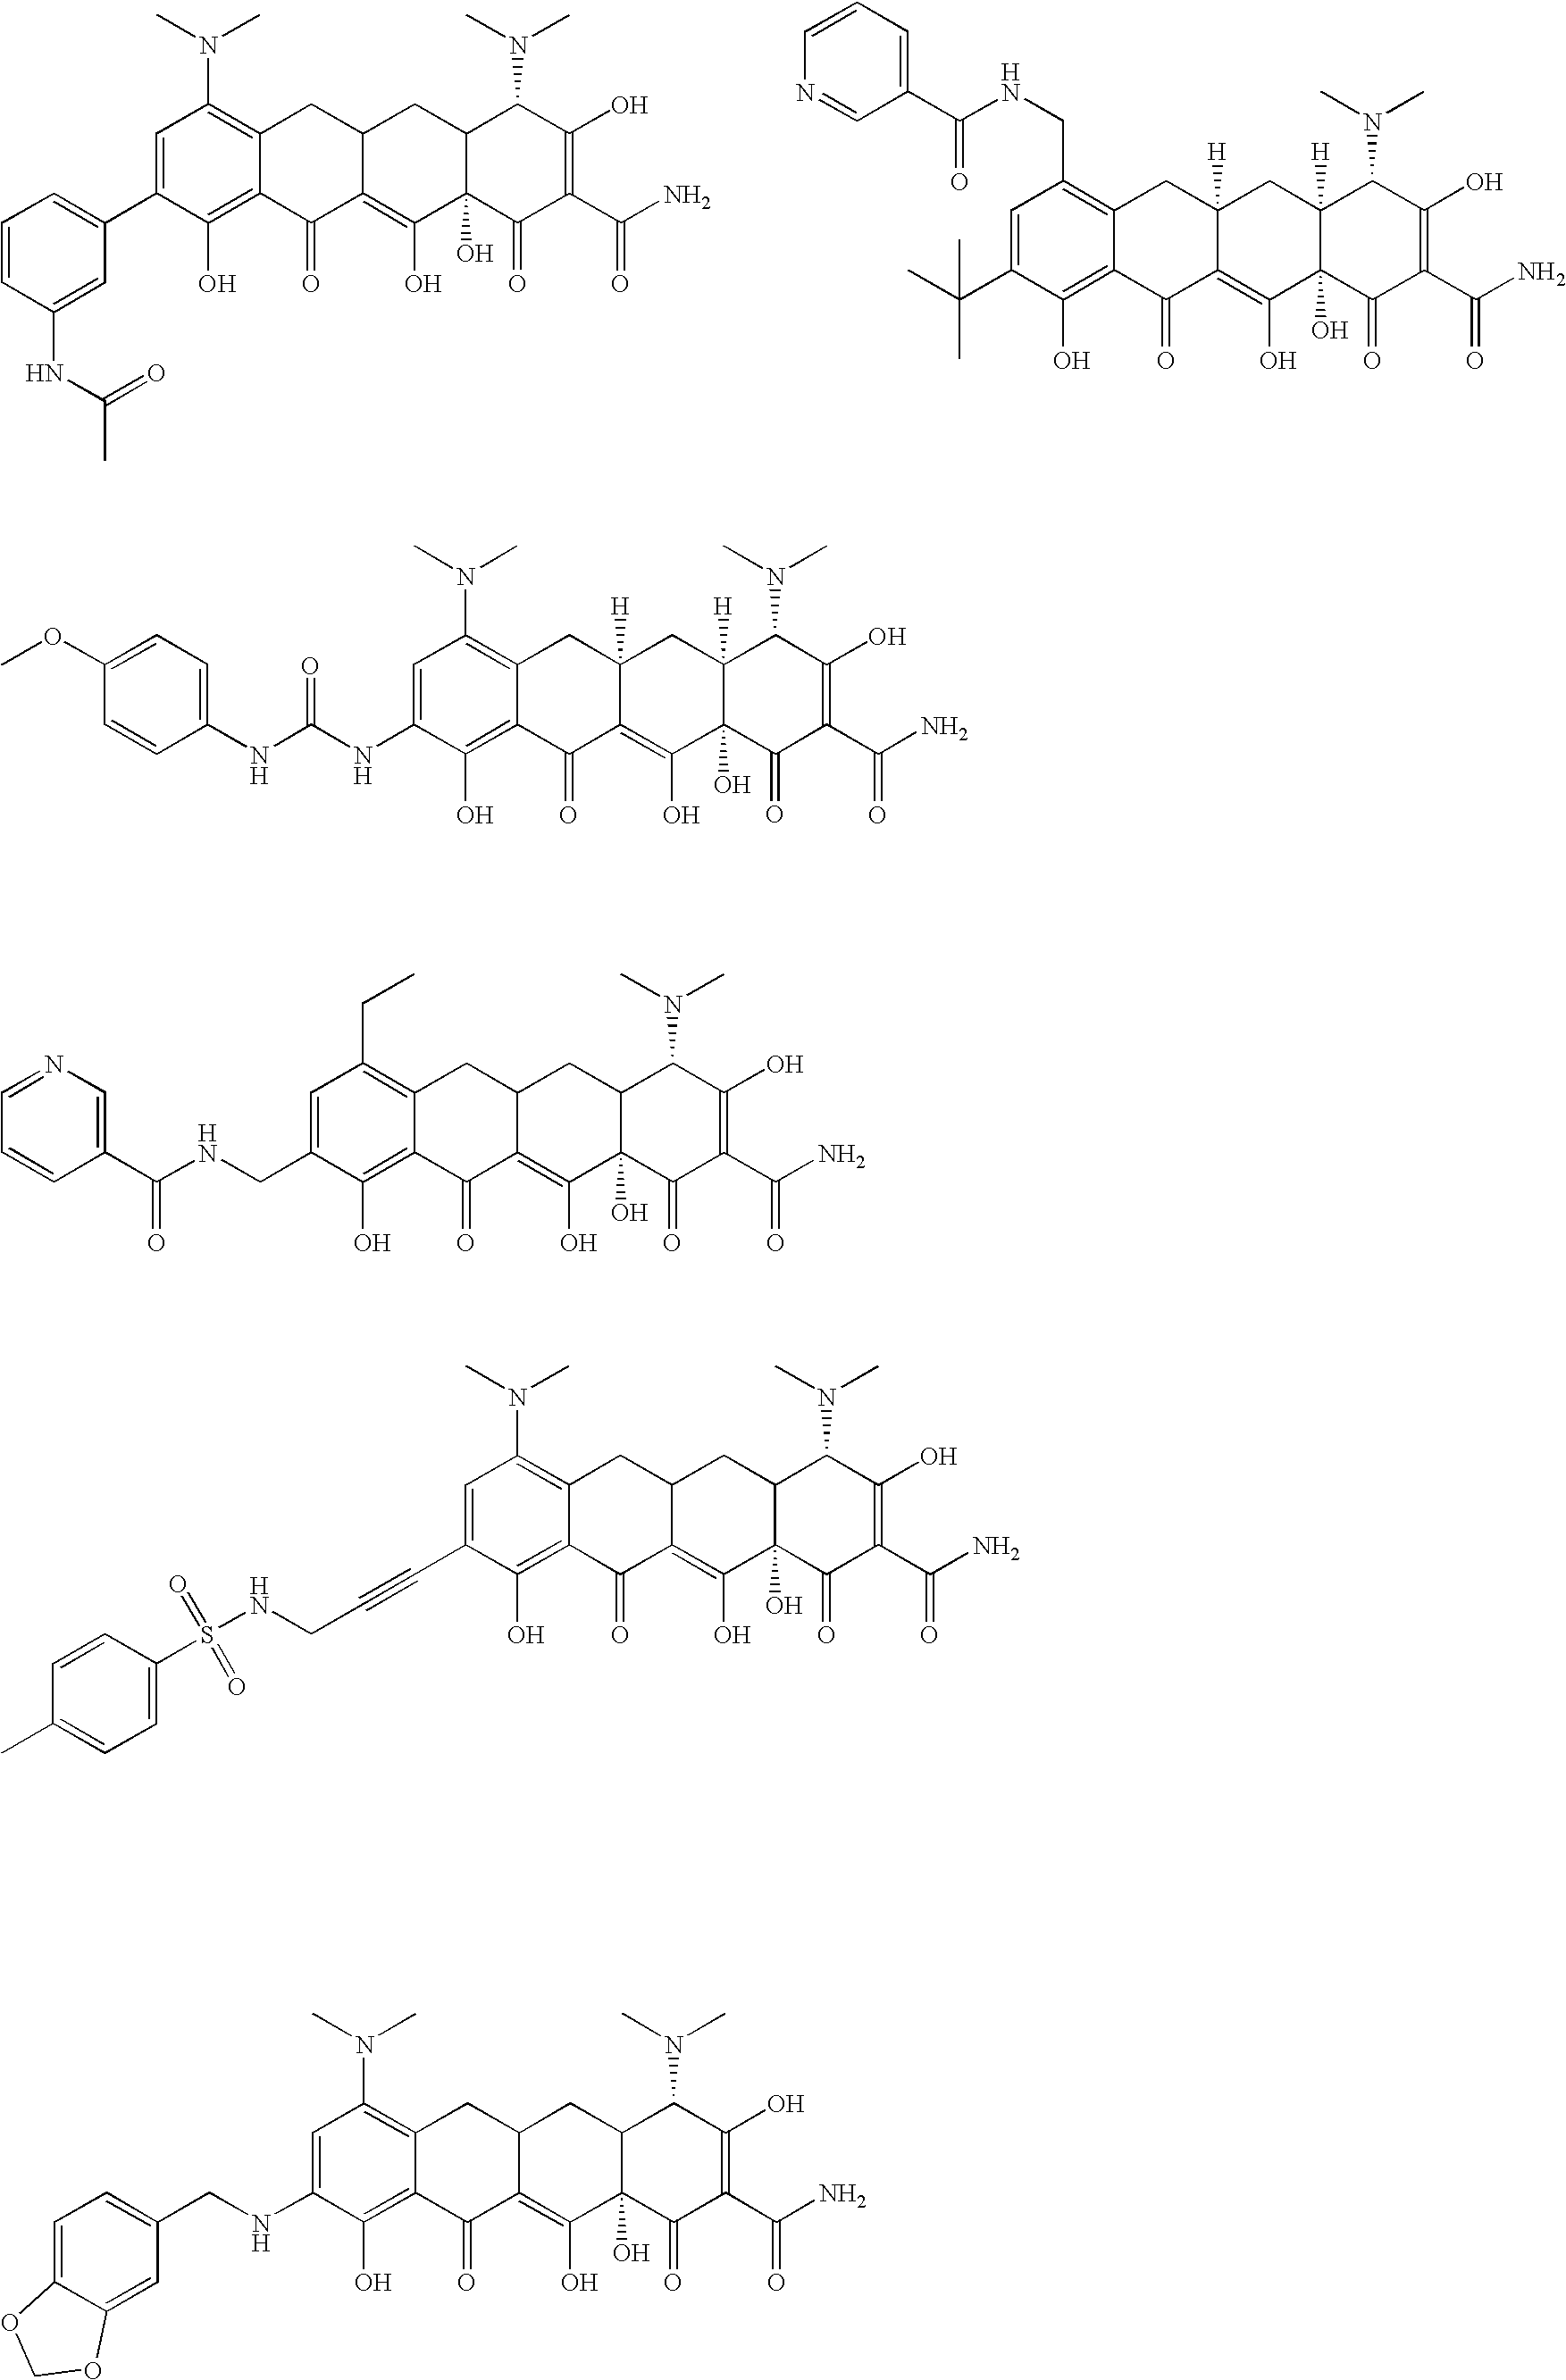 Substituted tetracycline compounds as synergistic antifungal agents